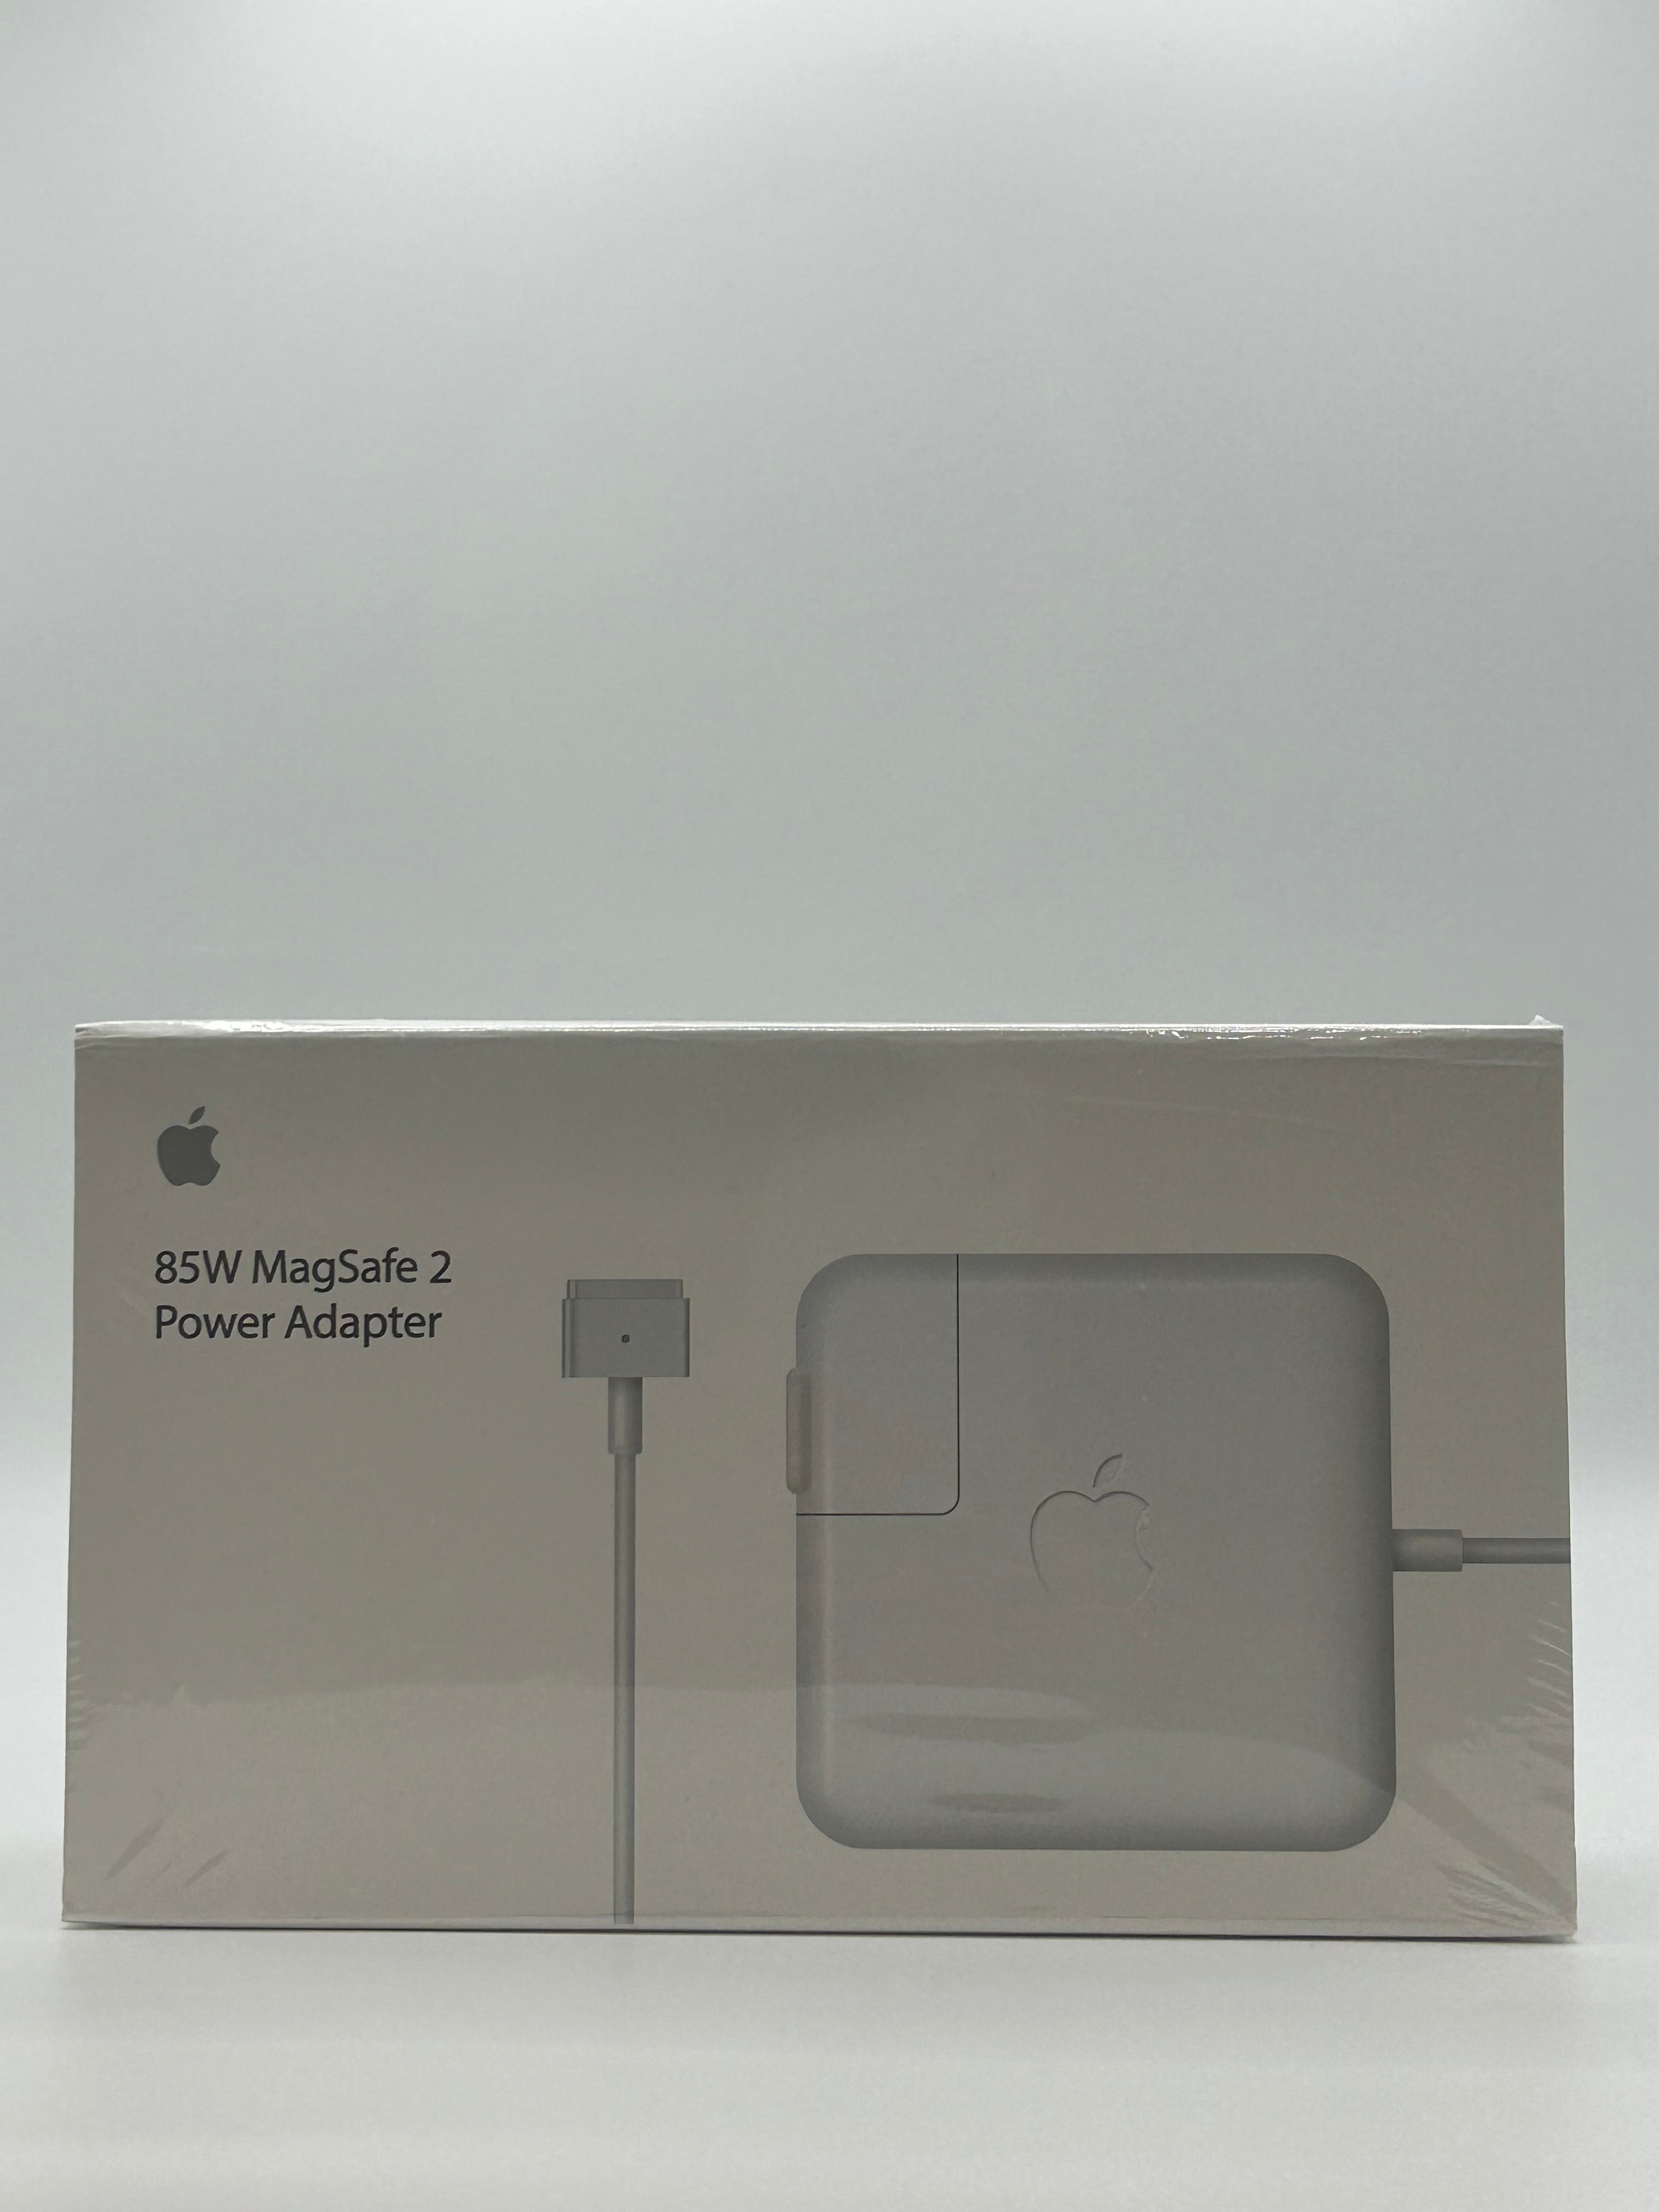 85W MagSafe 2 Power Adapter for Macbook